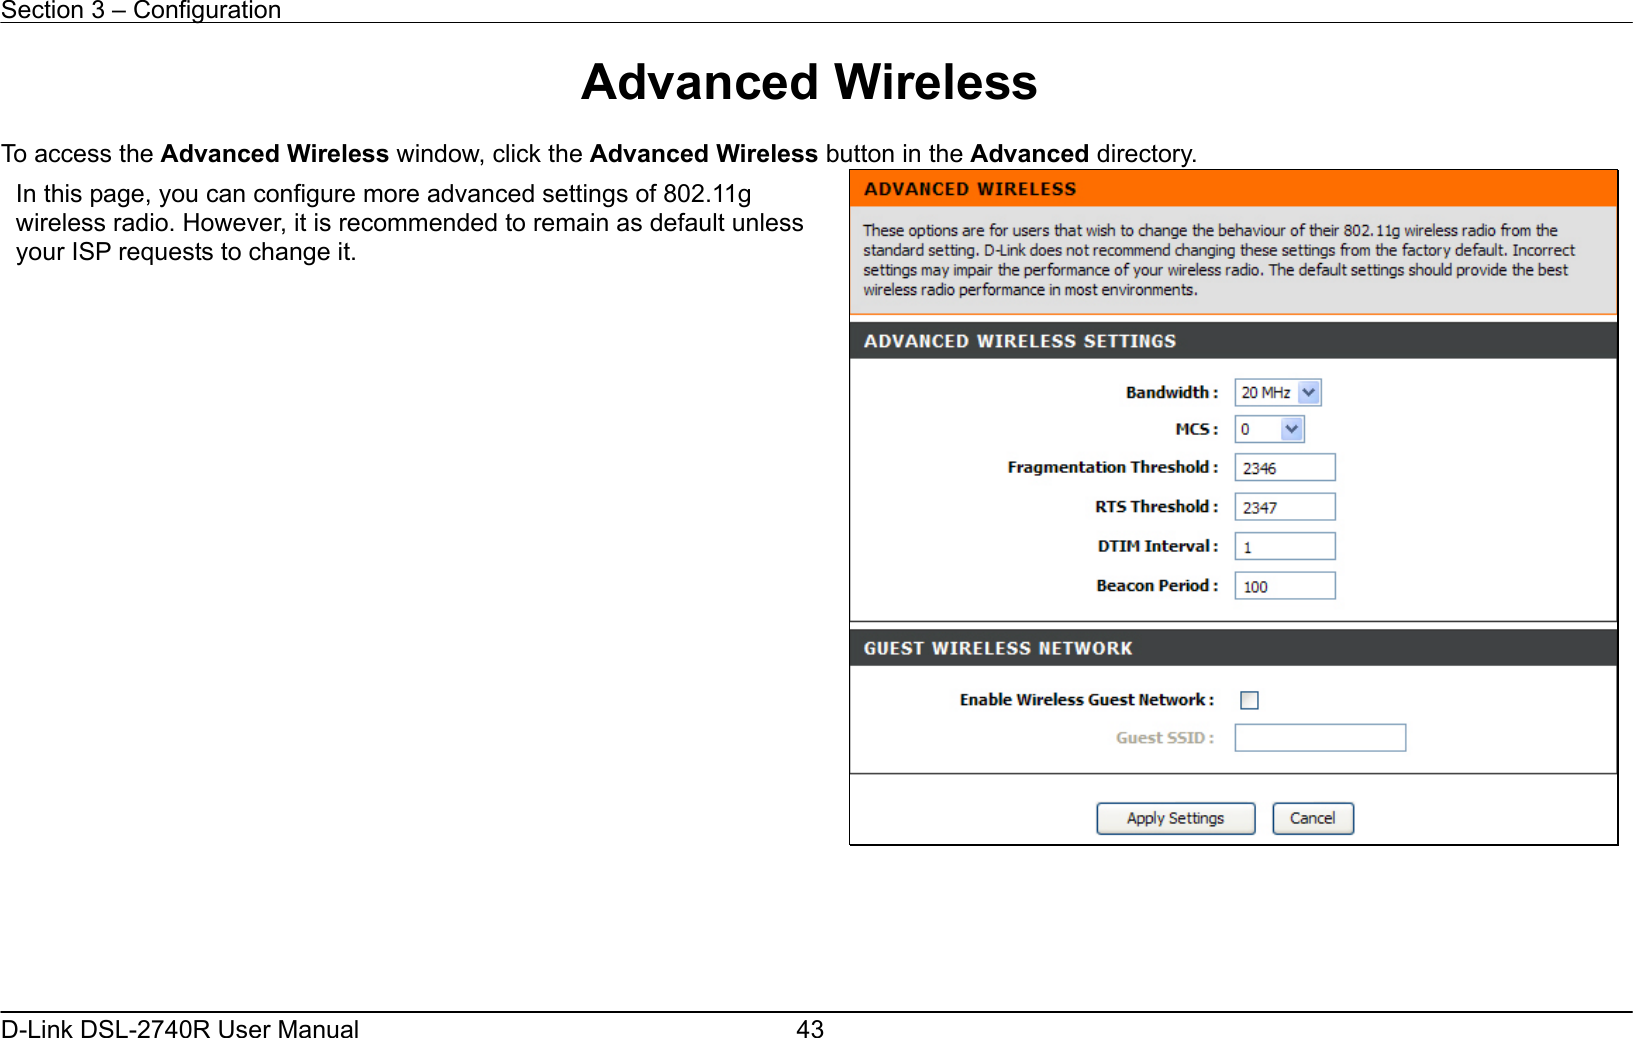 Section 3 – Configuration   D-Link DSL-2740R User Manual  43Advanced Wireless  To access the Advanced Wireless window, click the Advanced Wireless button in the Advanced directory.       In this page, you can configure more advanced settings of 802.11g wireless radio. However, it is recommended to remain as default unless your ISP requests to change it. 